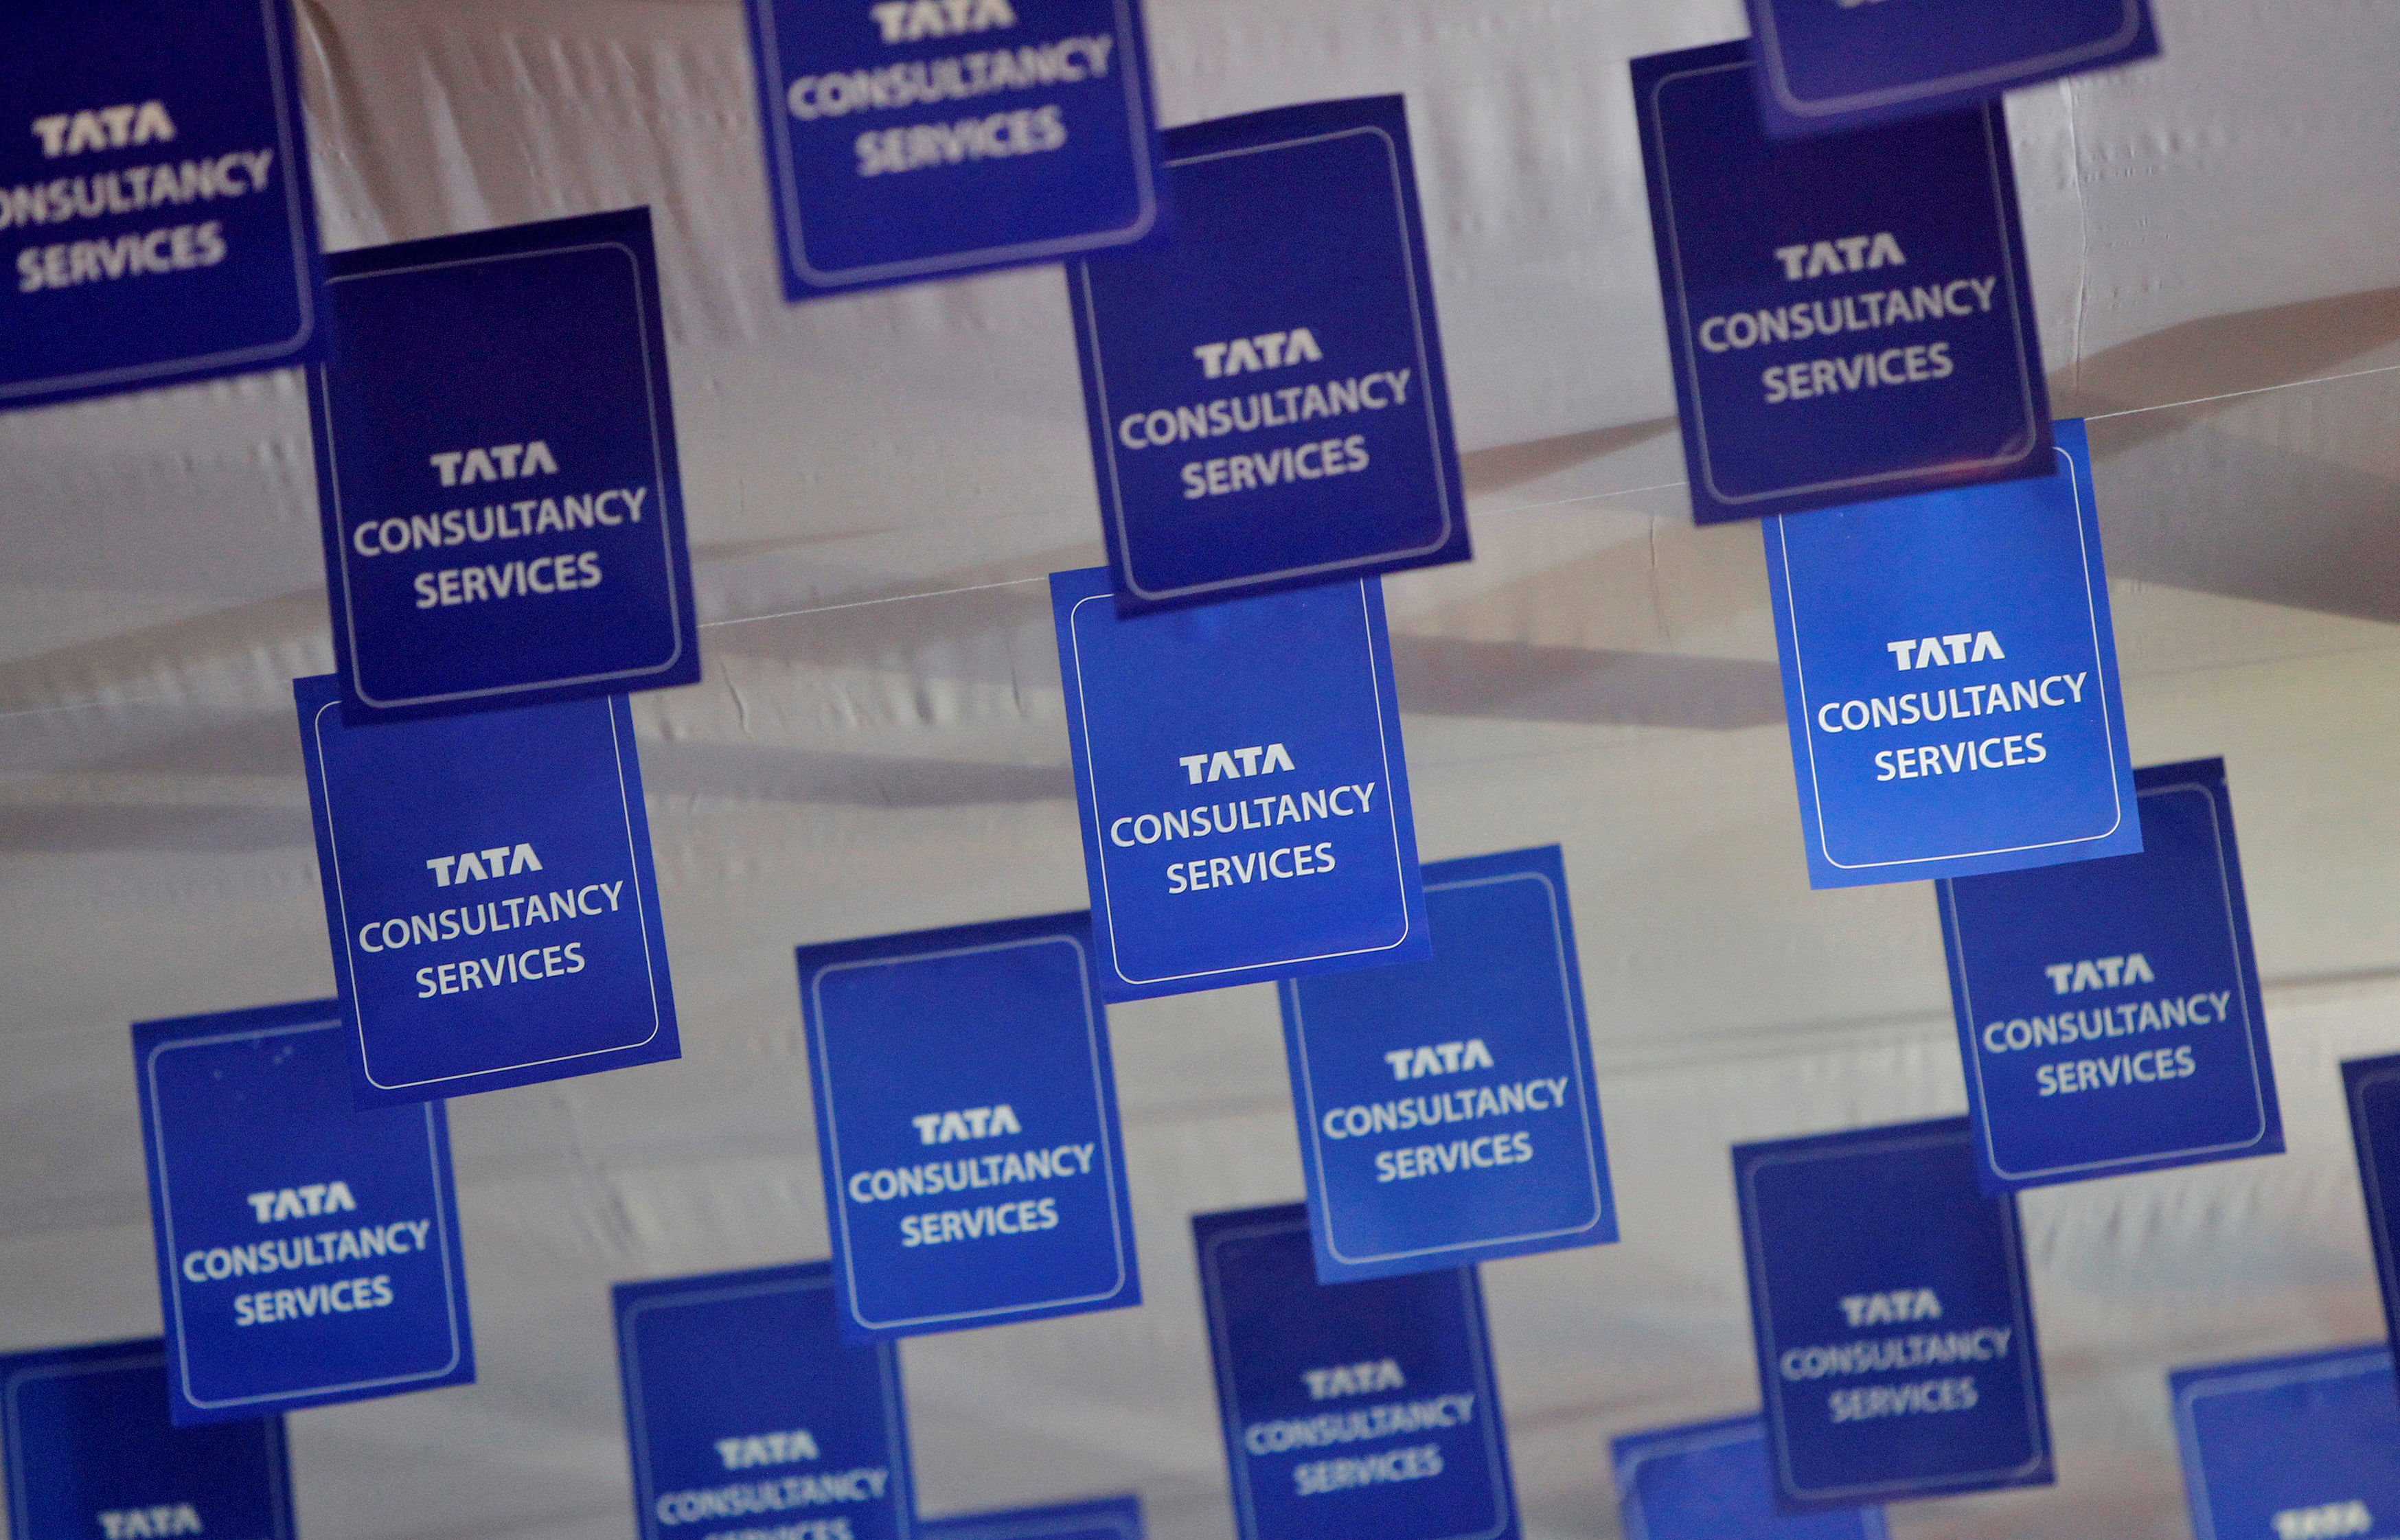 Logos of Tata Consultancy Services (TCS) are displayed at the venue of the annual general meeting of the software services provider in Mumbai. (Credit: Reuters)